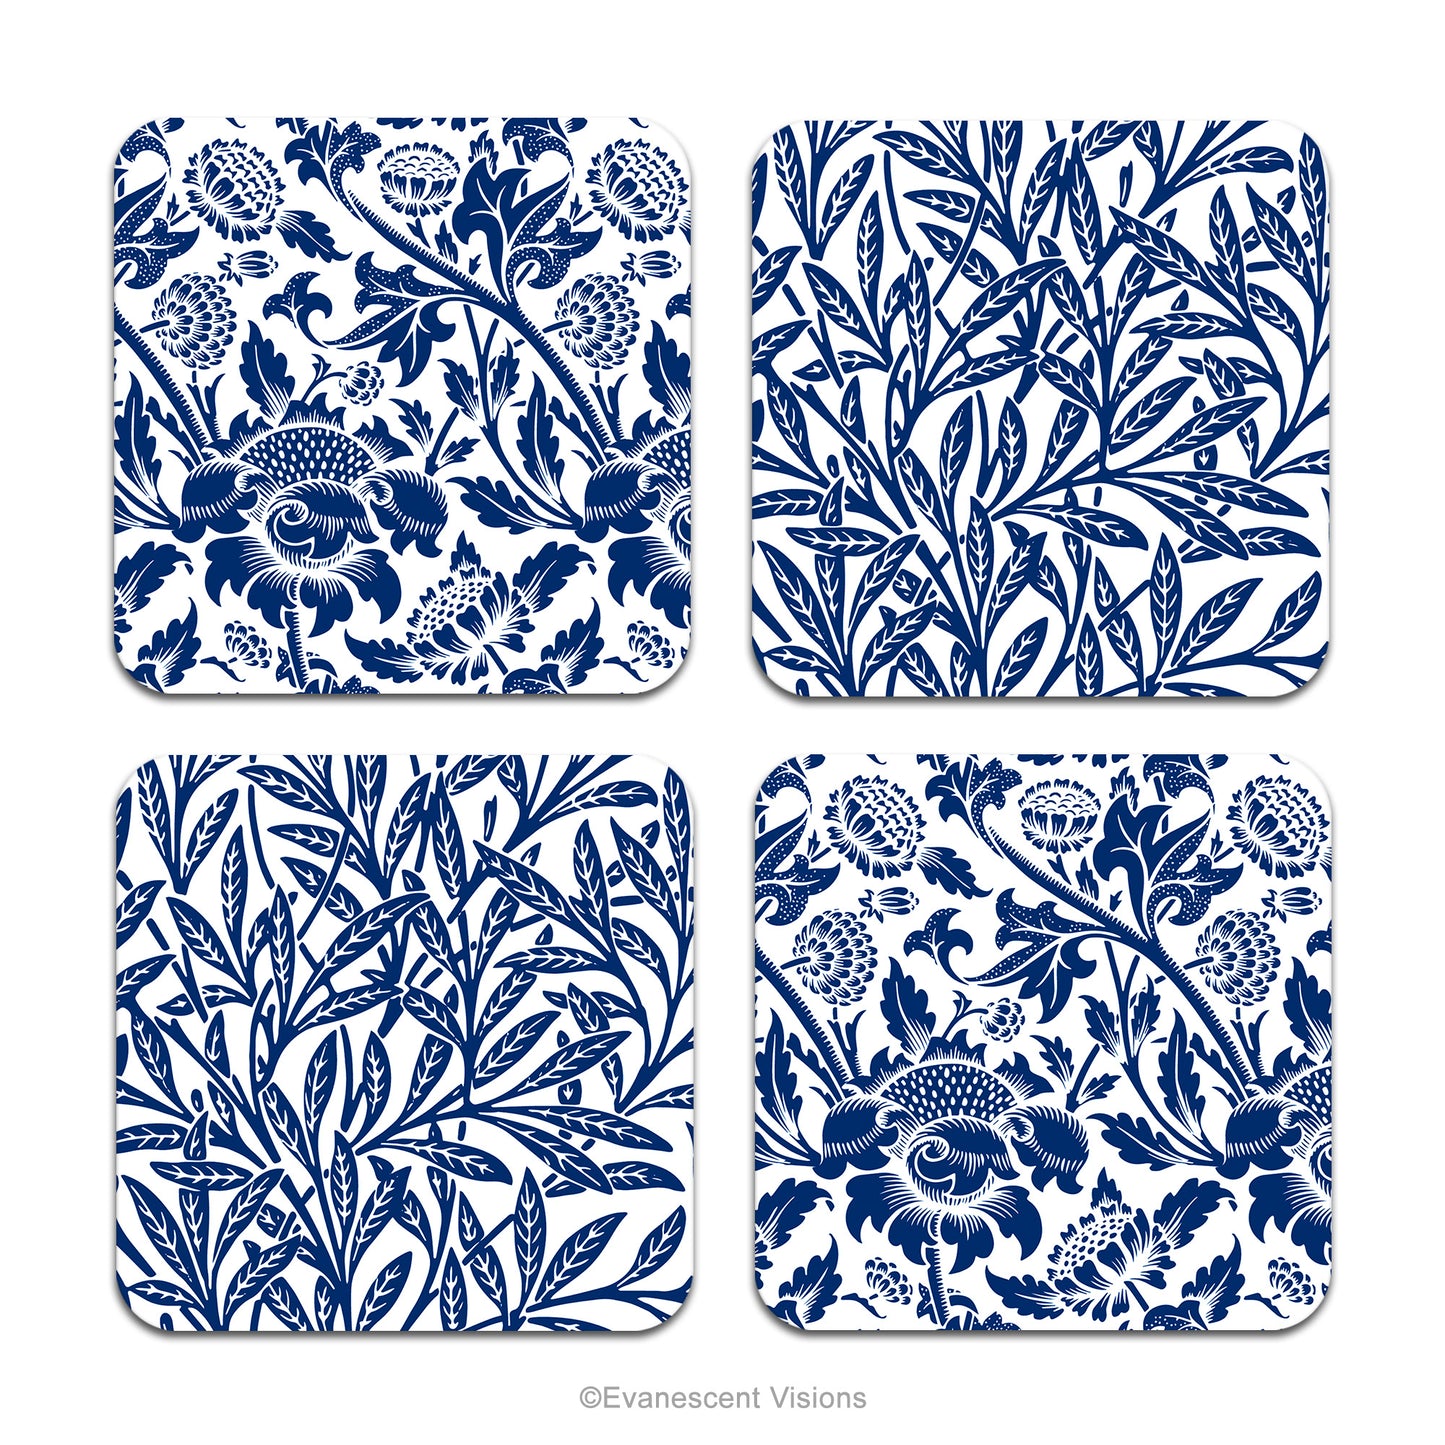 Set of 4 coasters with blue and white floral and botanical patterns.